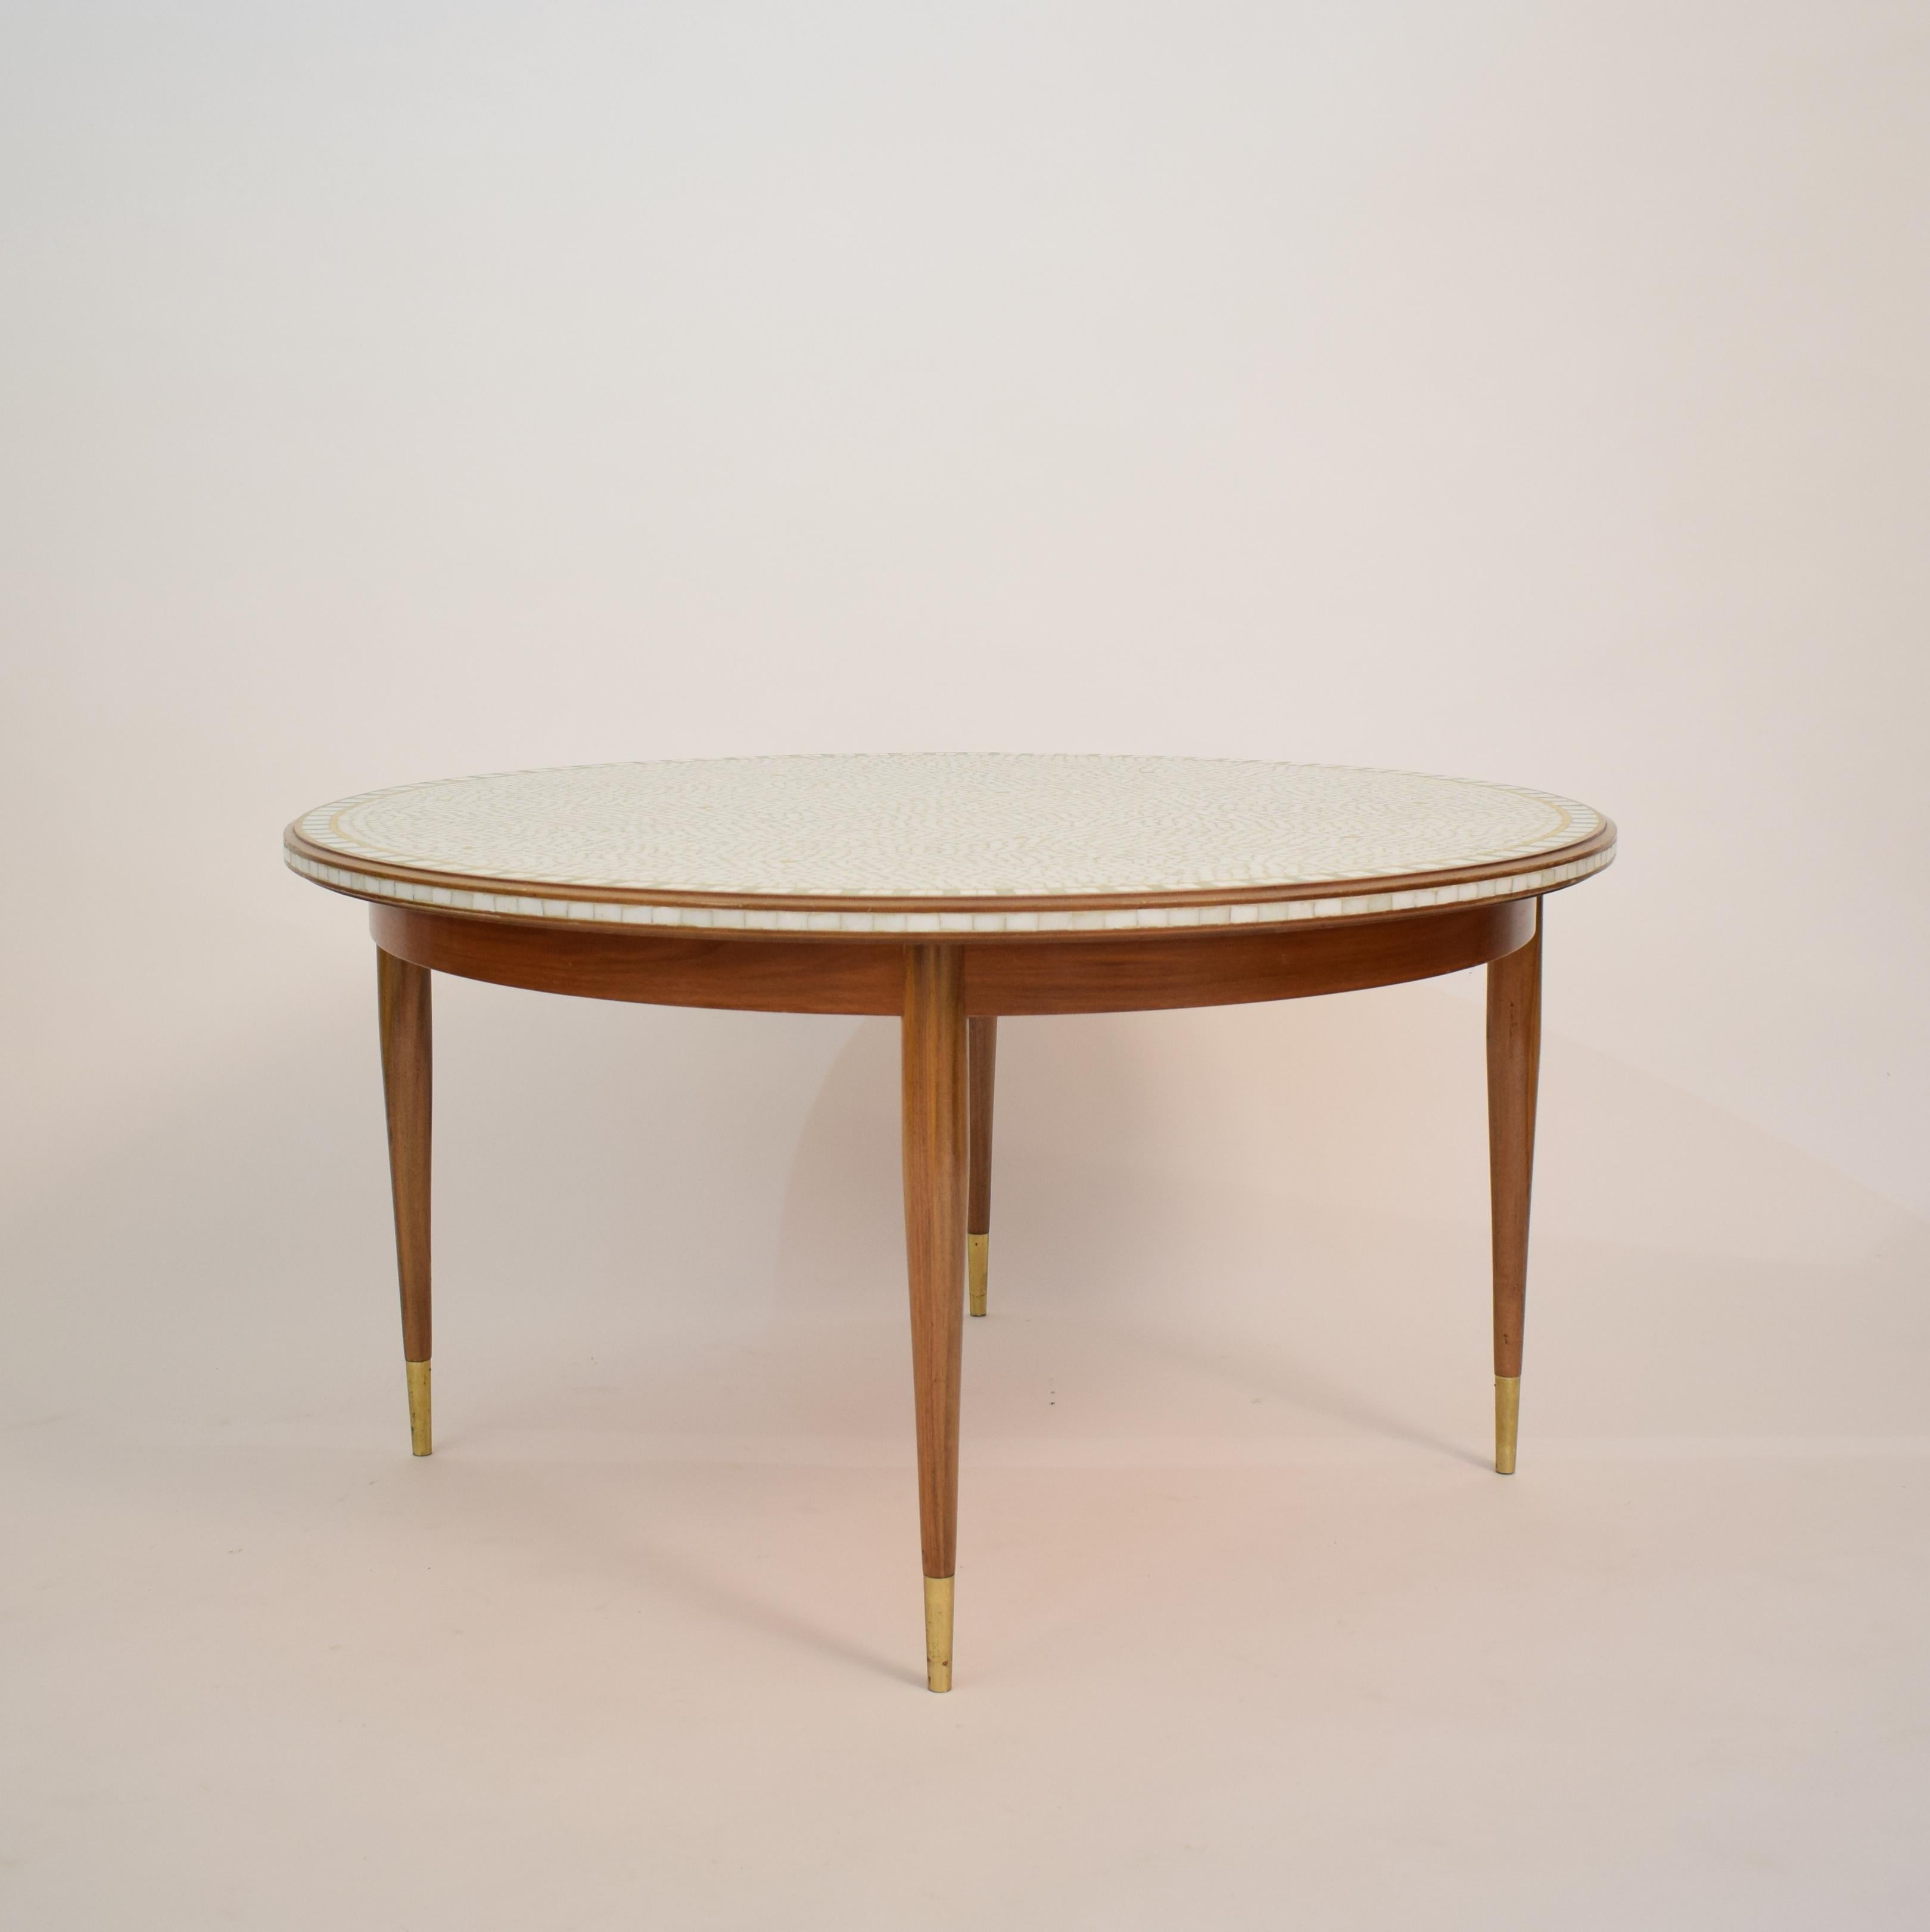 This beautiful and elegant round mosaic top coffee table with a Walnut frame and legs was designed by the German artist and sculptor Berthold Muller (1893-1979). 
The top has white ceramic stones combined with a gold and some mint green ceramic